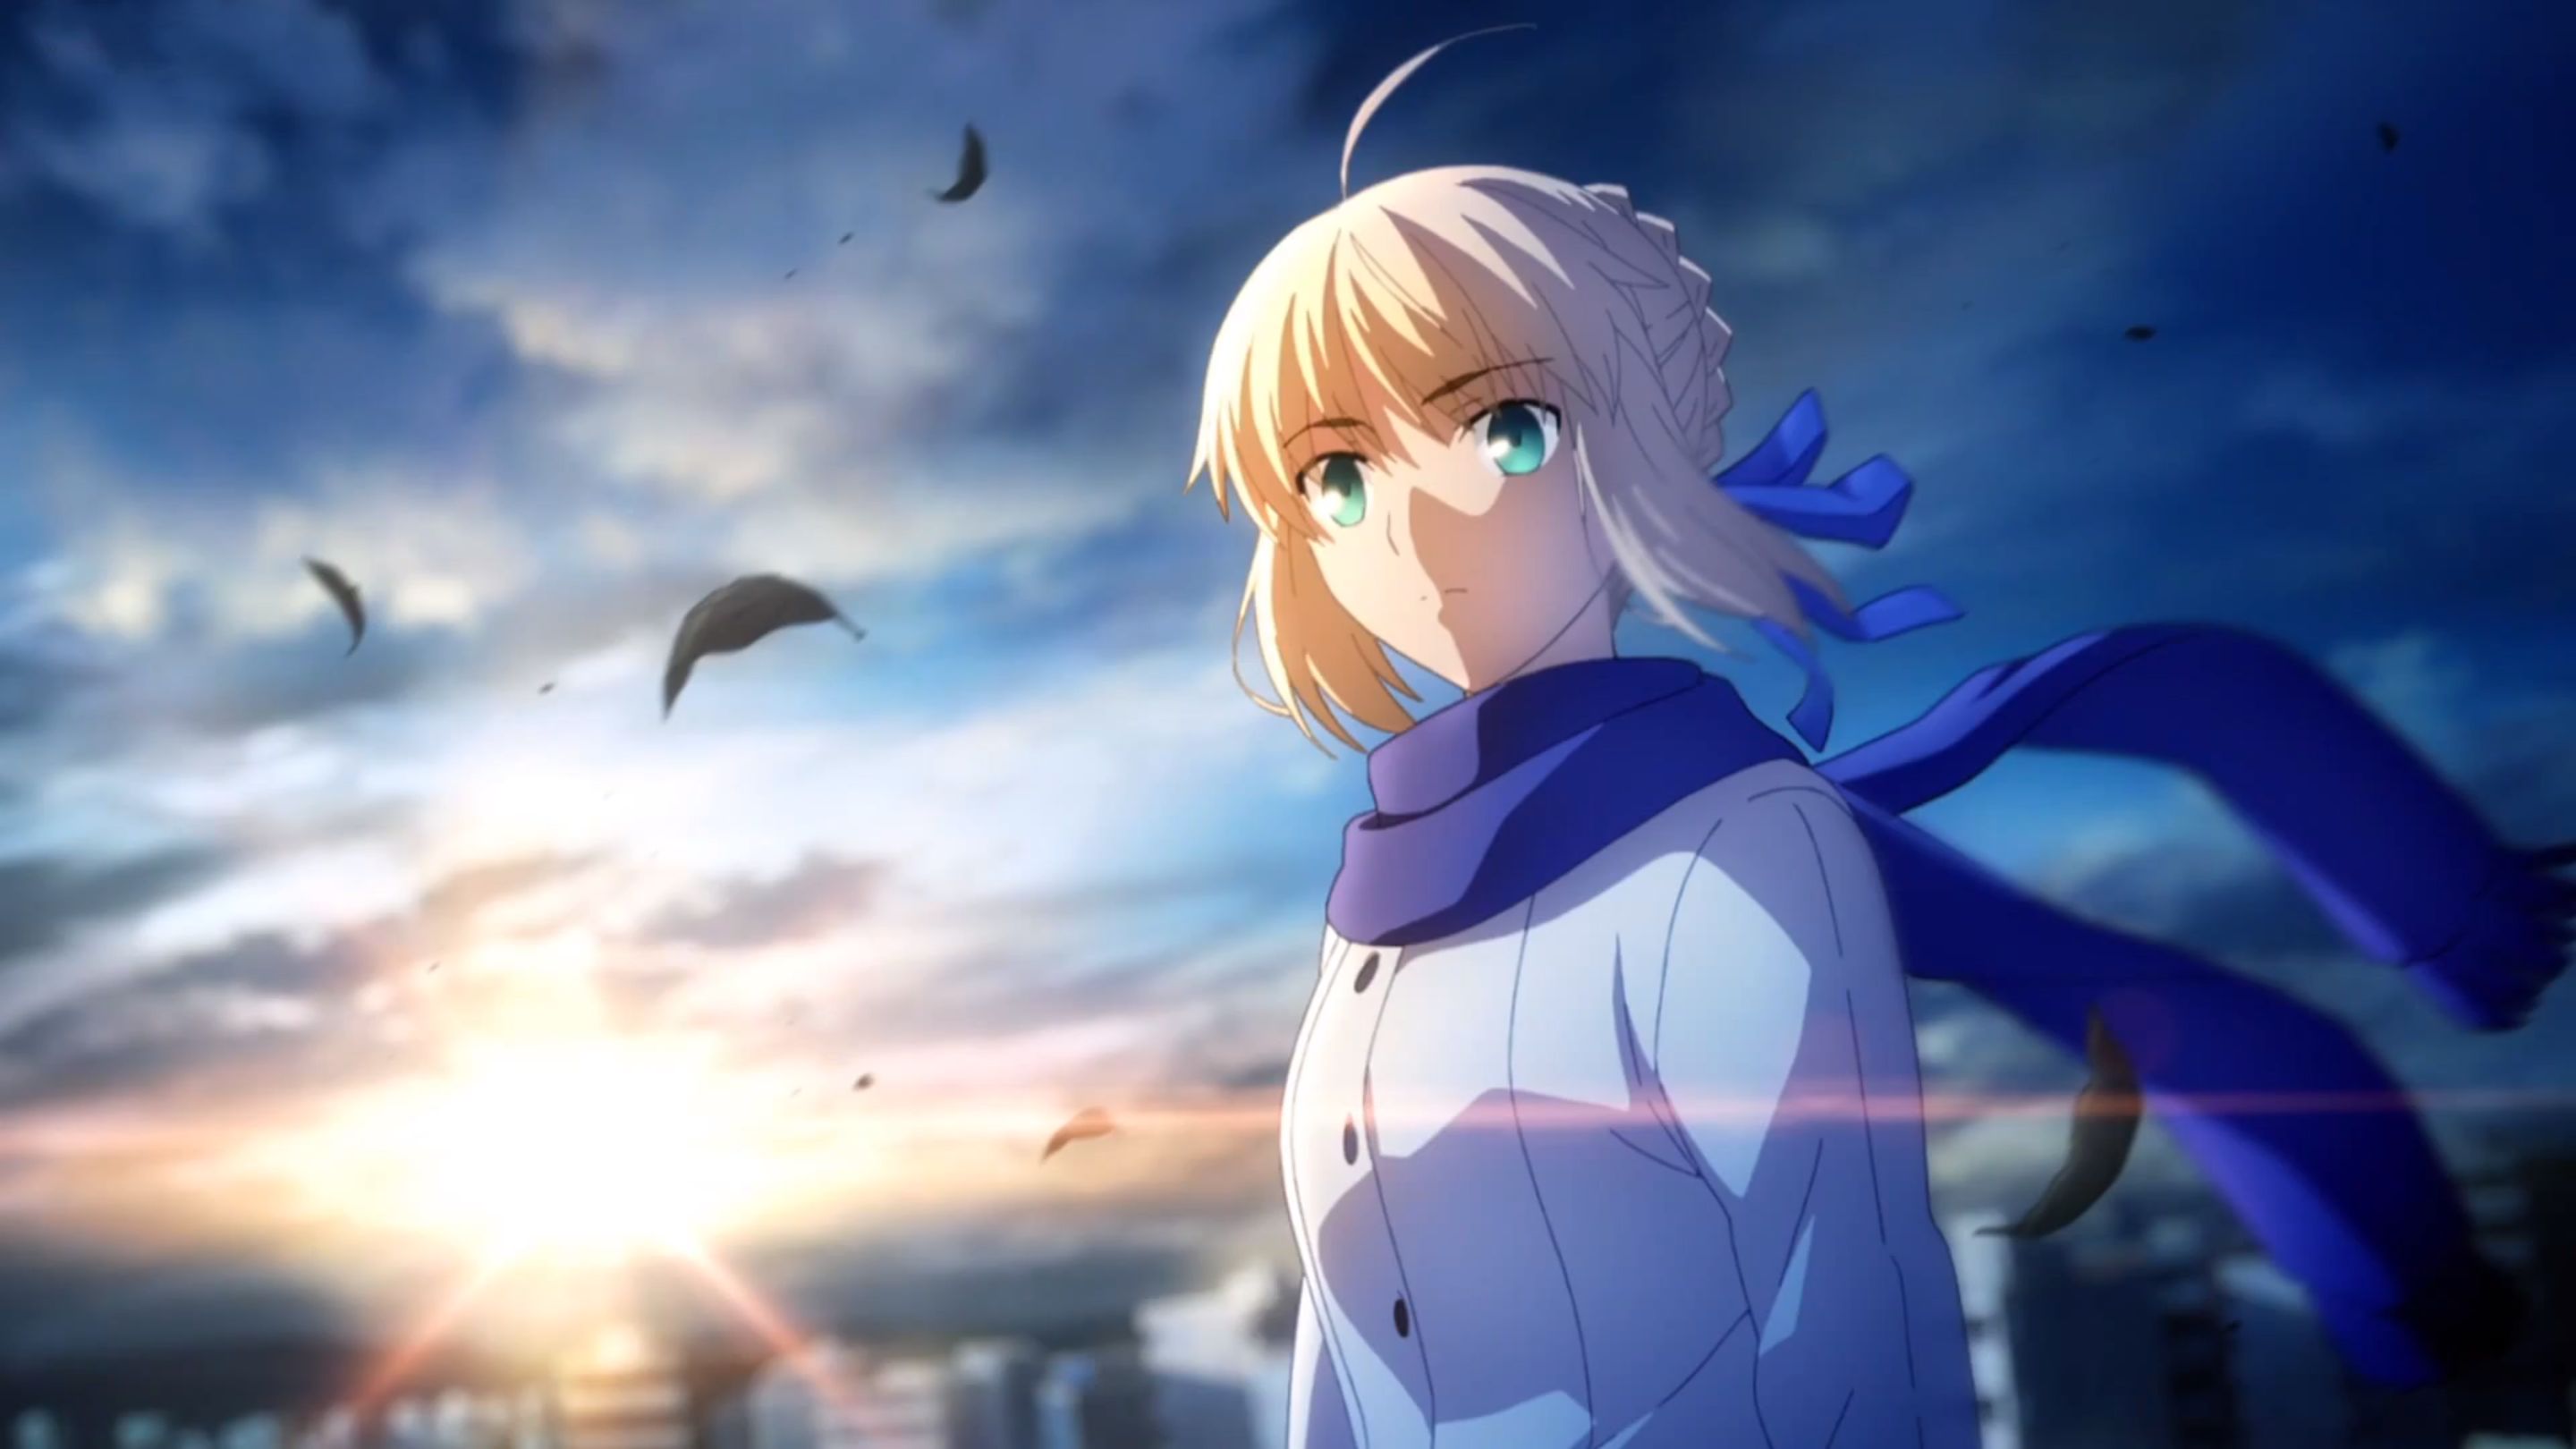 saber (fate series), fate/stay night: unlimited blade works, anime, fate series